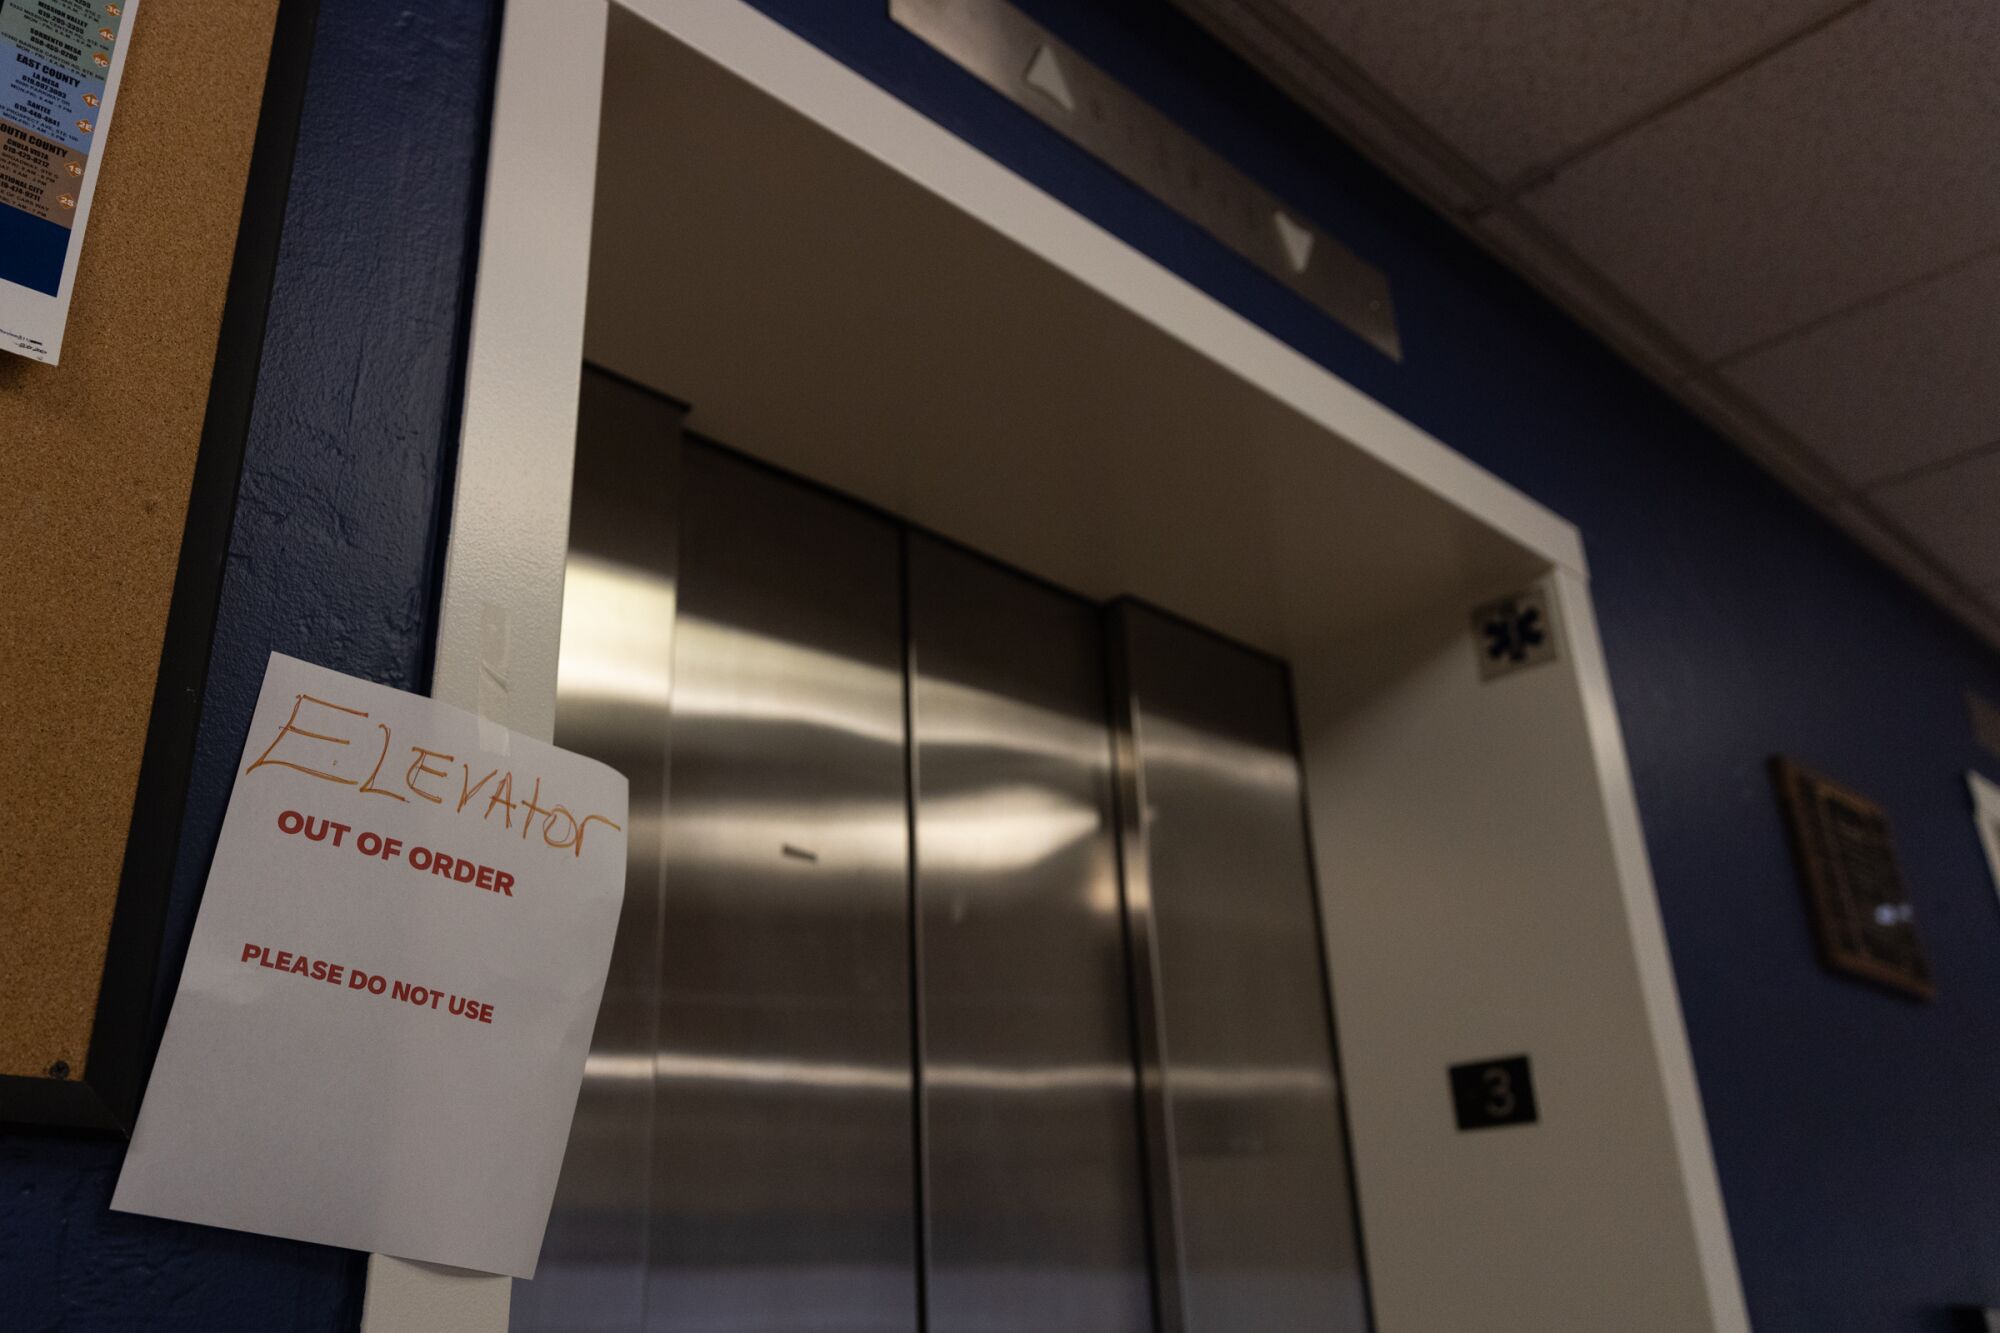 An out of order sign is seen posted at an elevator at the City Operations Building.